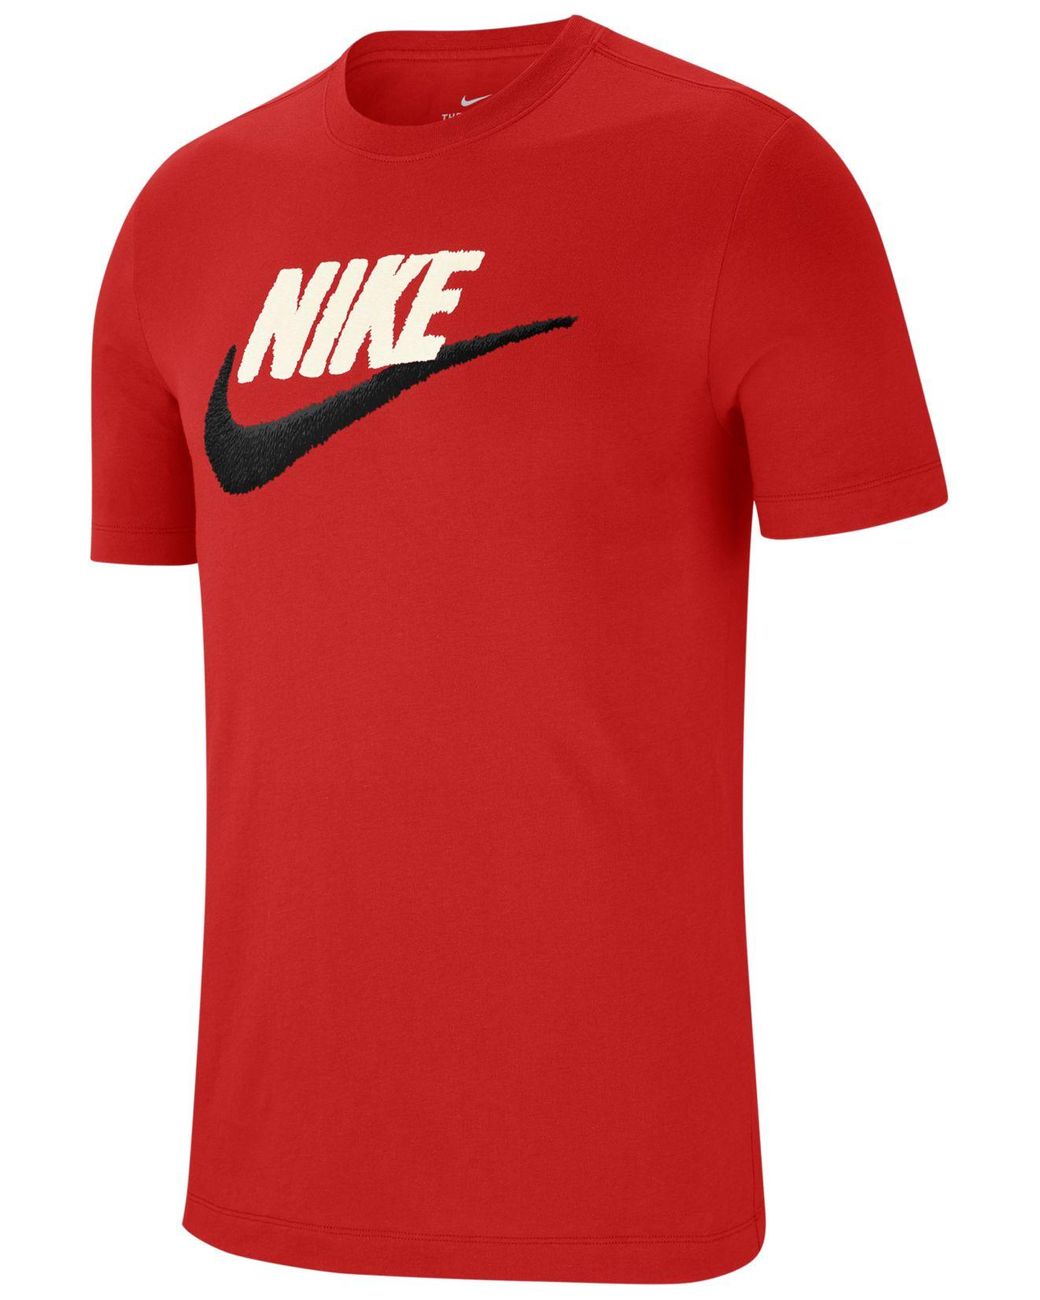 Nike Plus Swoosh T-shirt In Red for Men - Save 44% - Lyst